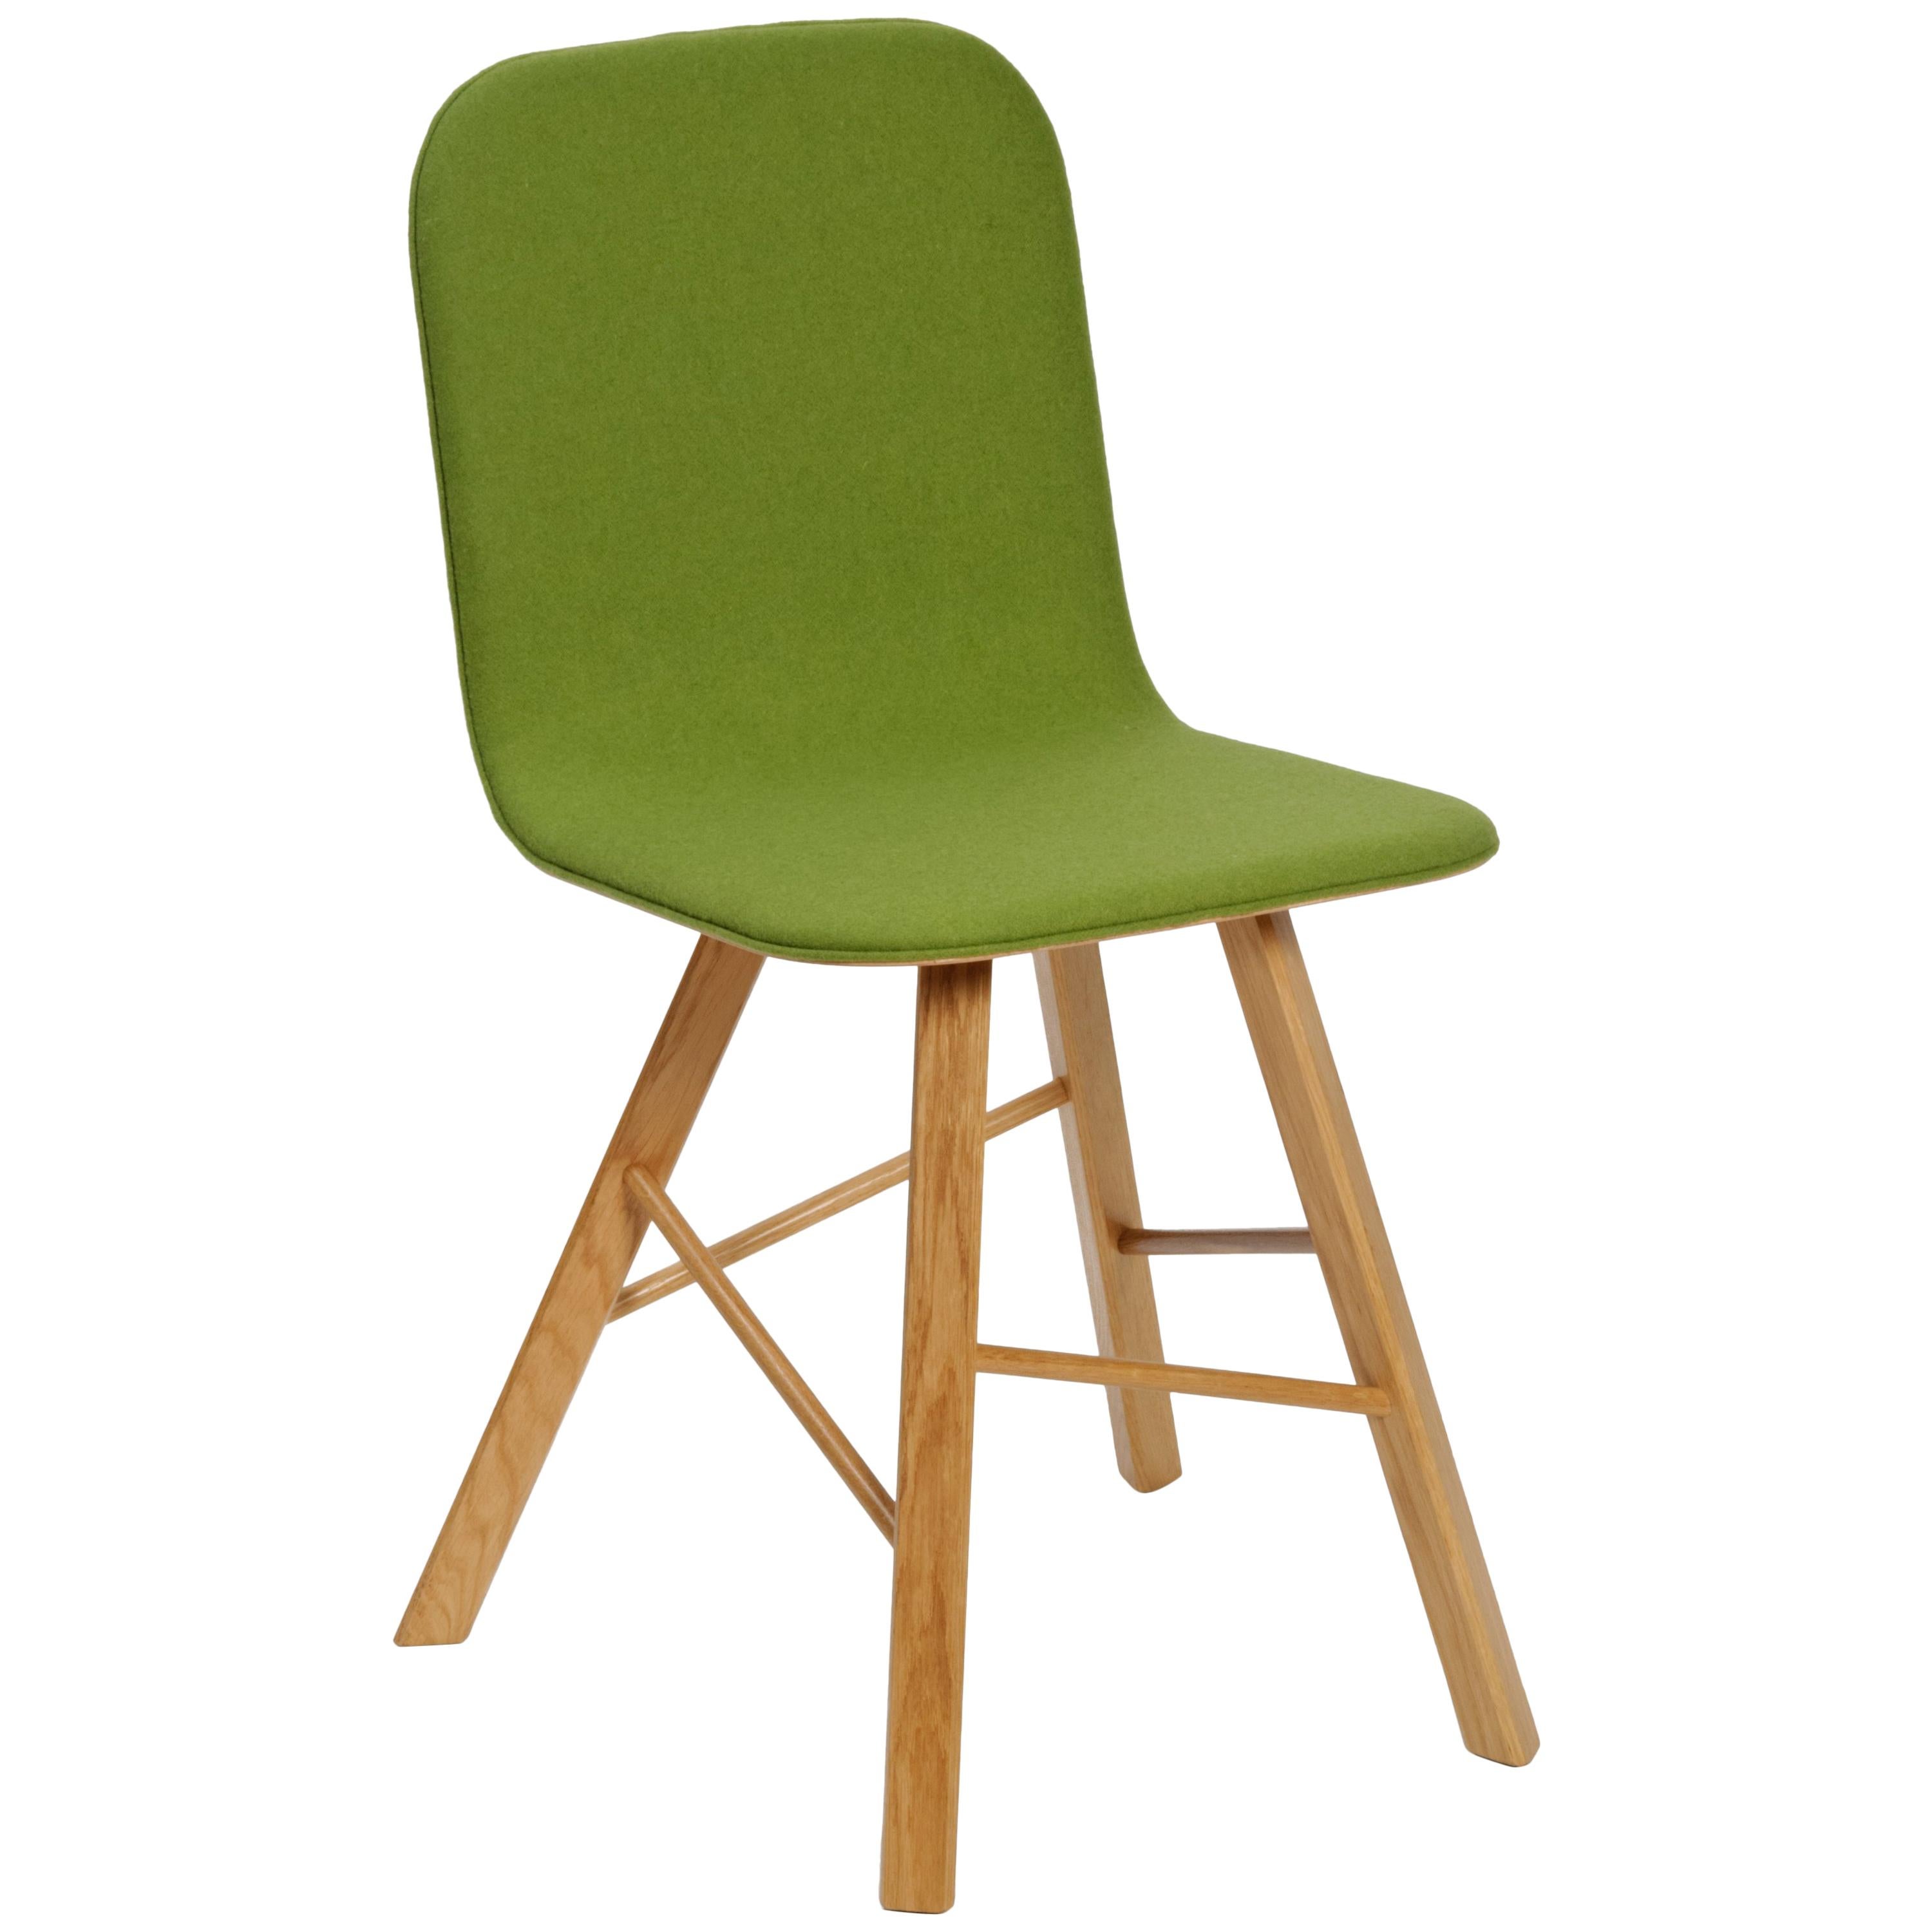 Tria Simple Chair Oak and Green Upholstered Seat by Colé, Minimalist For Sale